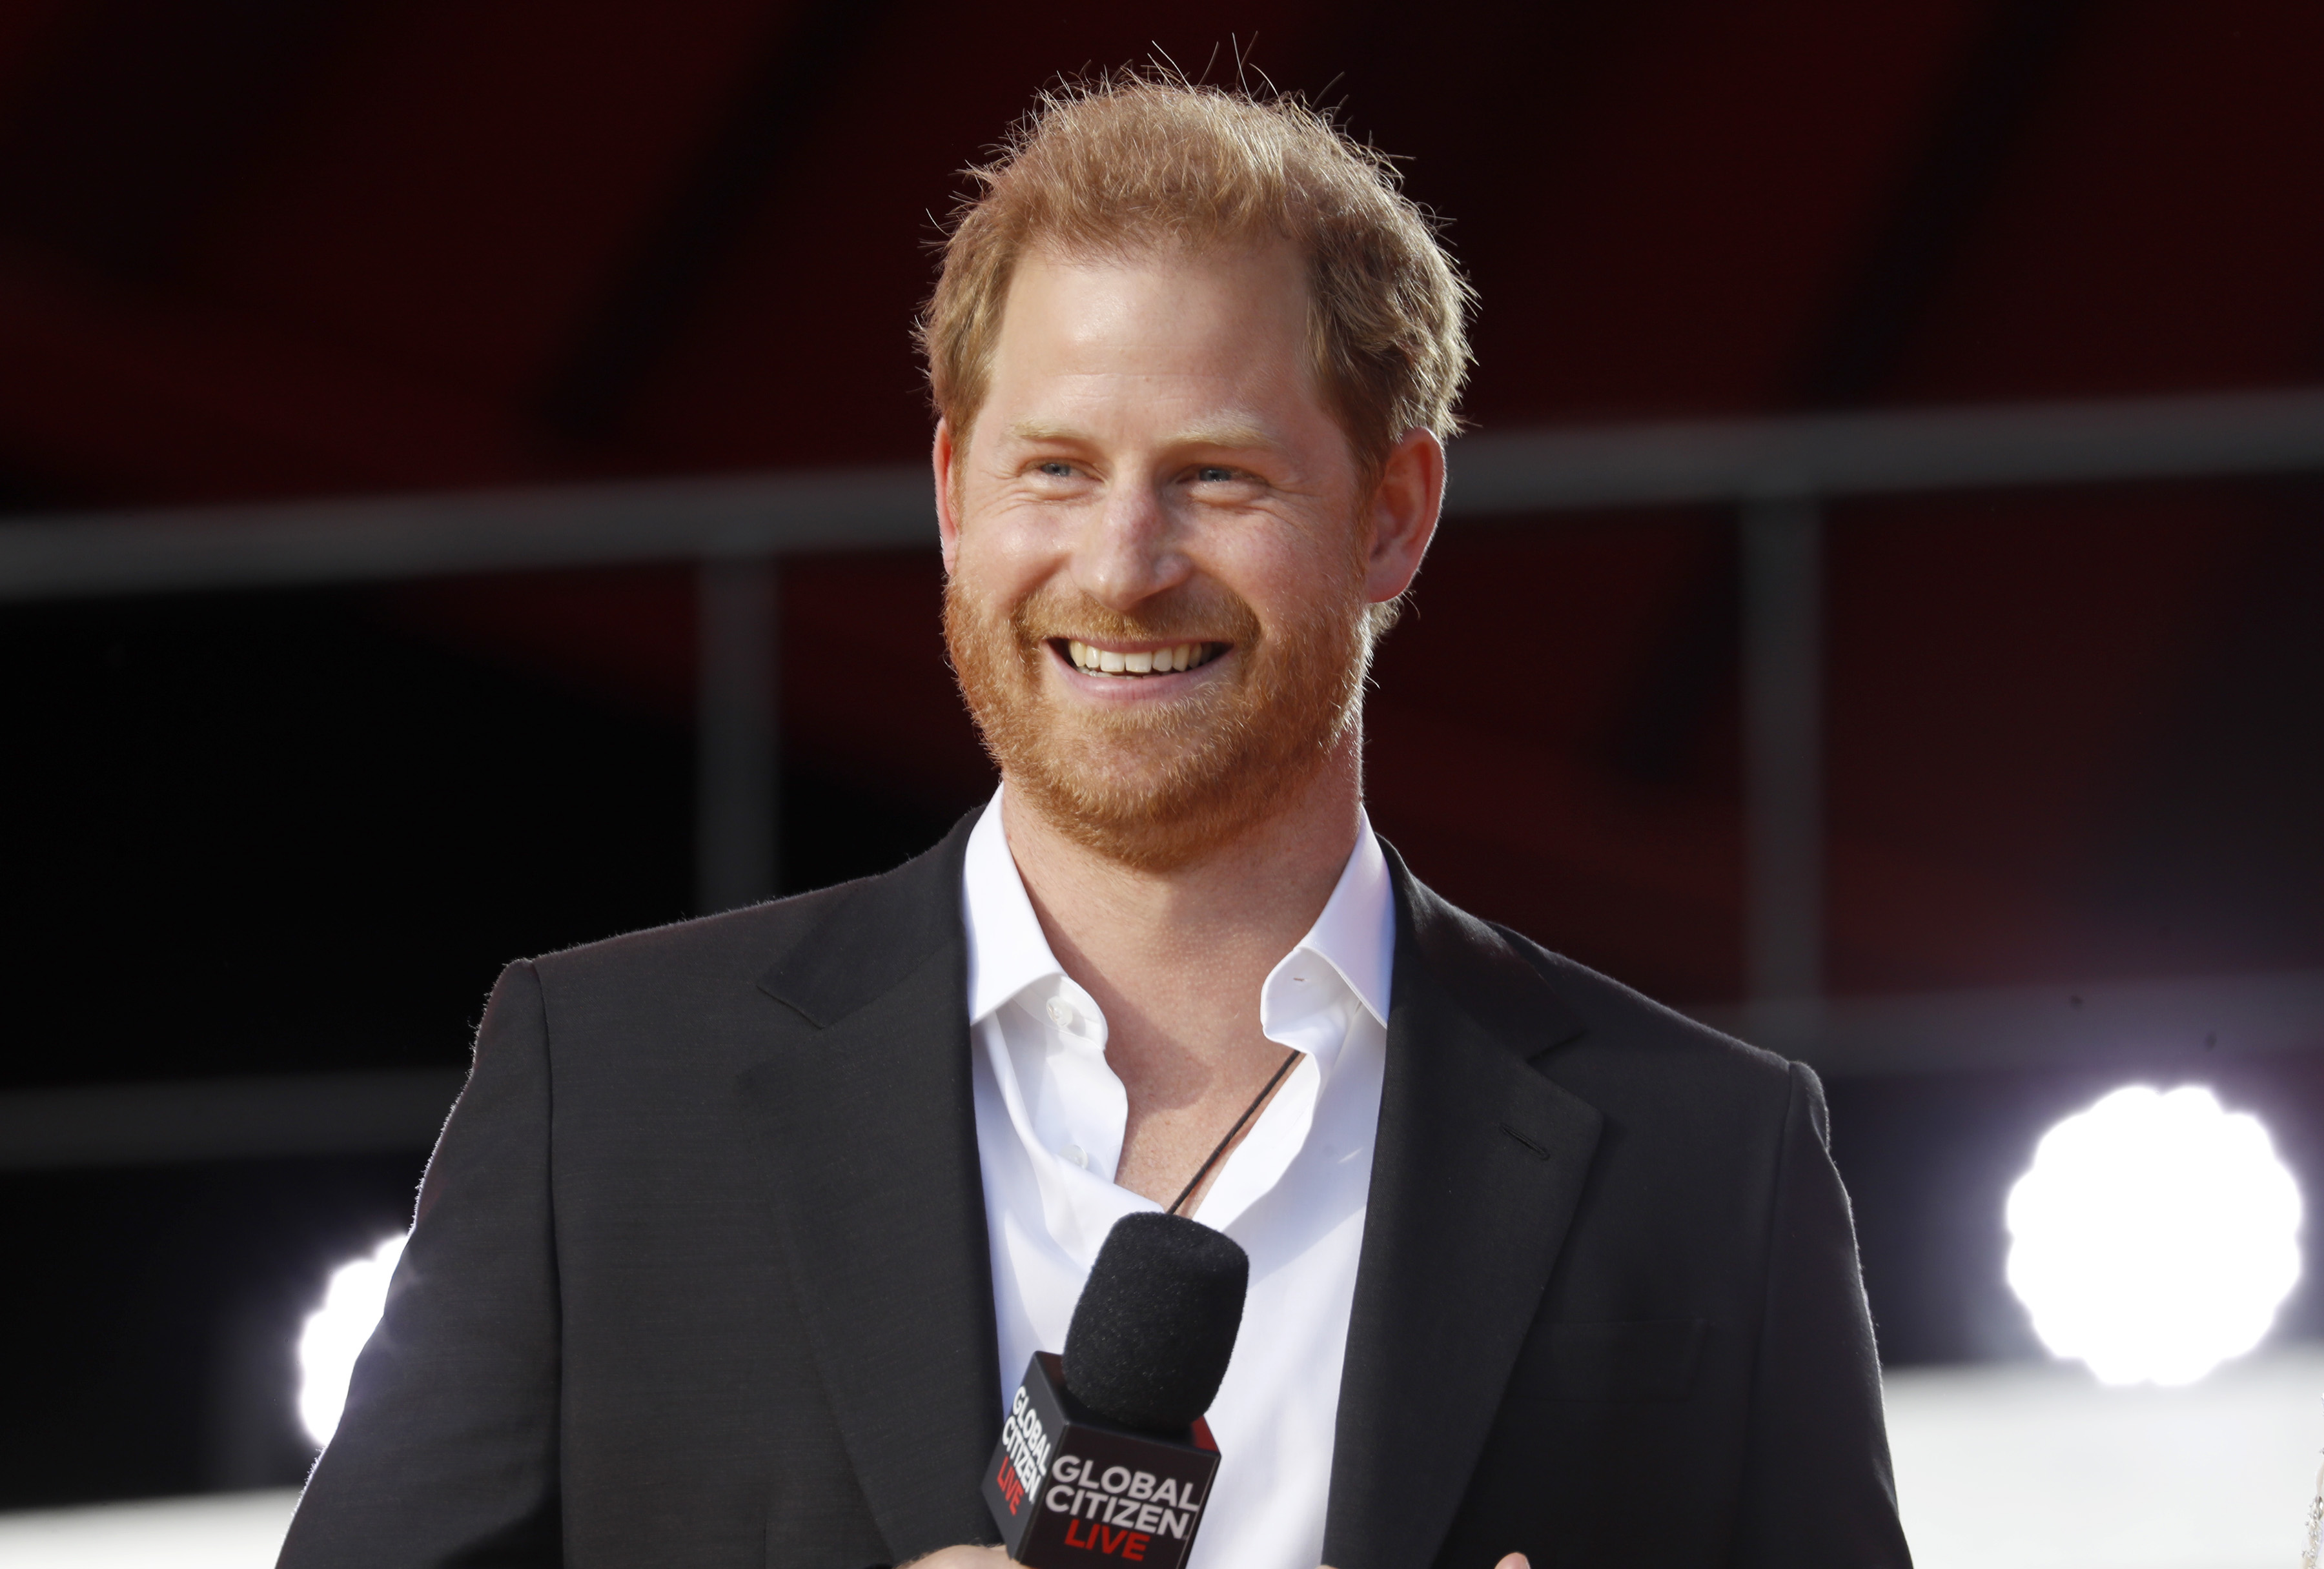 Prince Harry smiling as he speaks onstage during Global Citizen Live